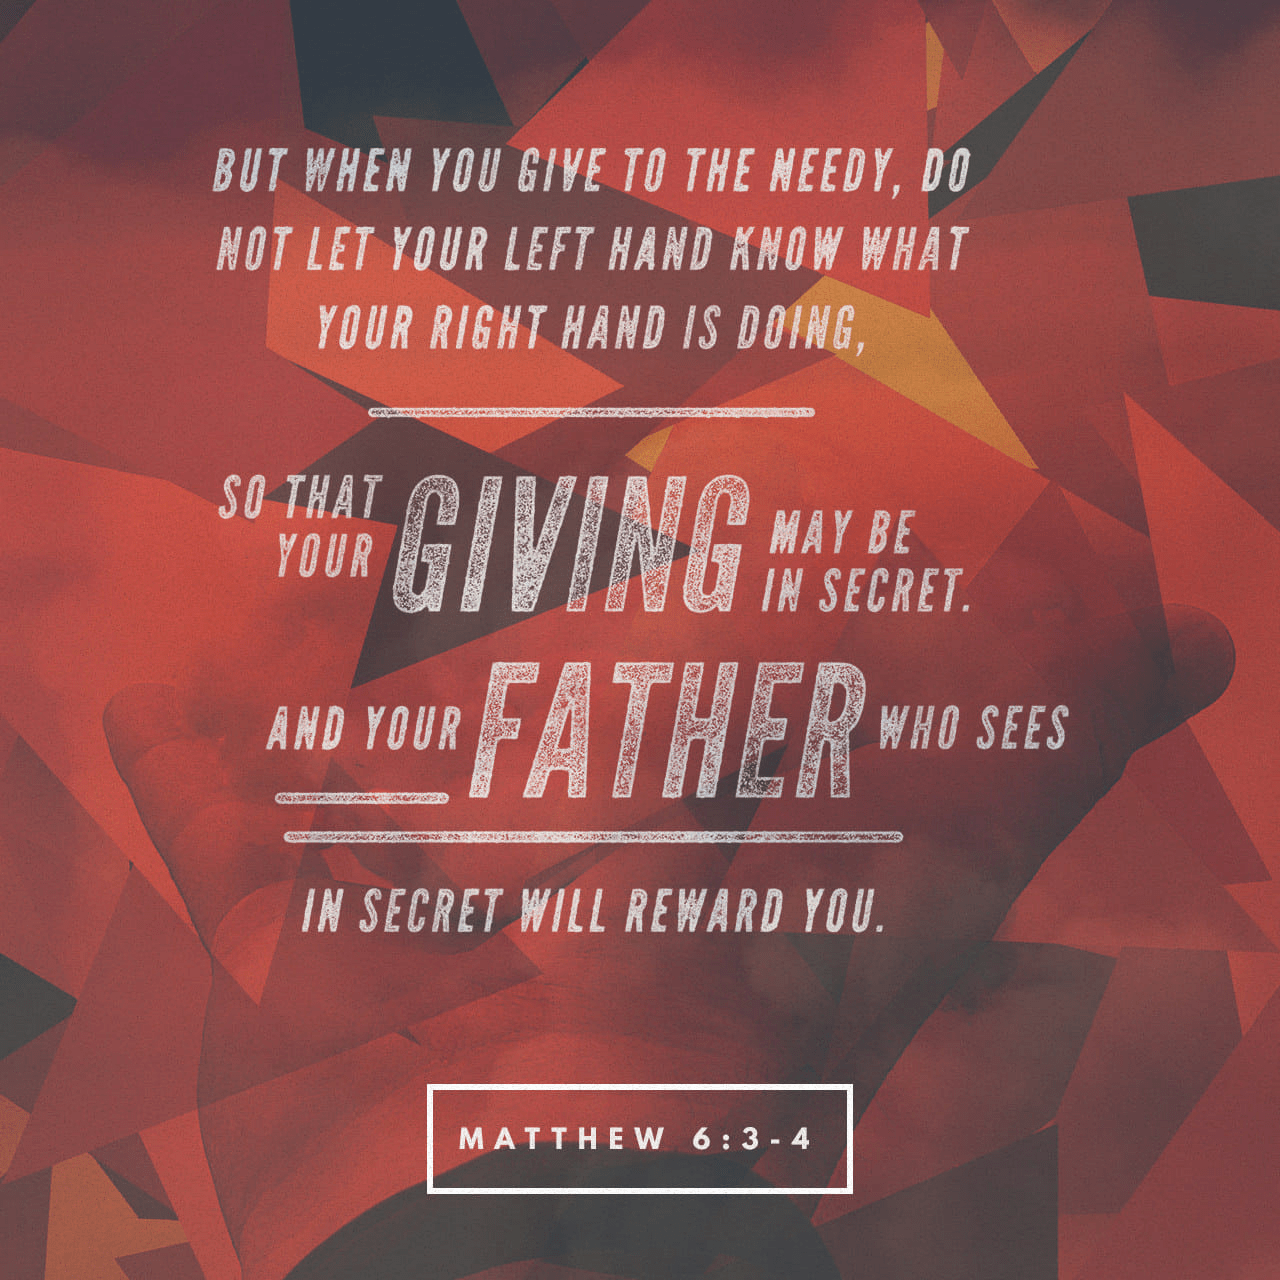 VOTD January 15 - But when you give to the poor, do not let your left hand know what your right hand is doing, so that your giving will be in secret; and your Father who sees what is done in secret will reward you. ‭‭Matthew‬ ‭6:3‬-4 ‭NASB‬‬